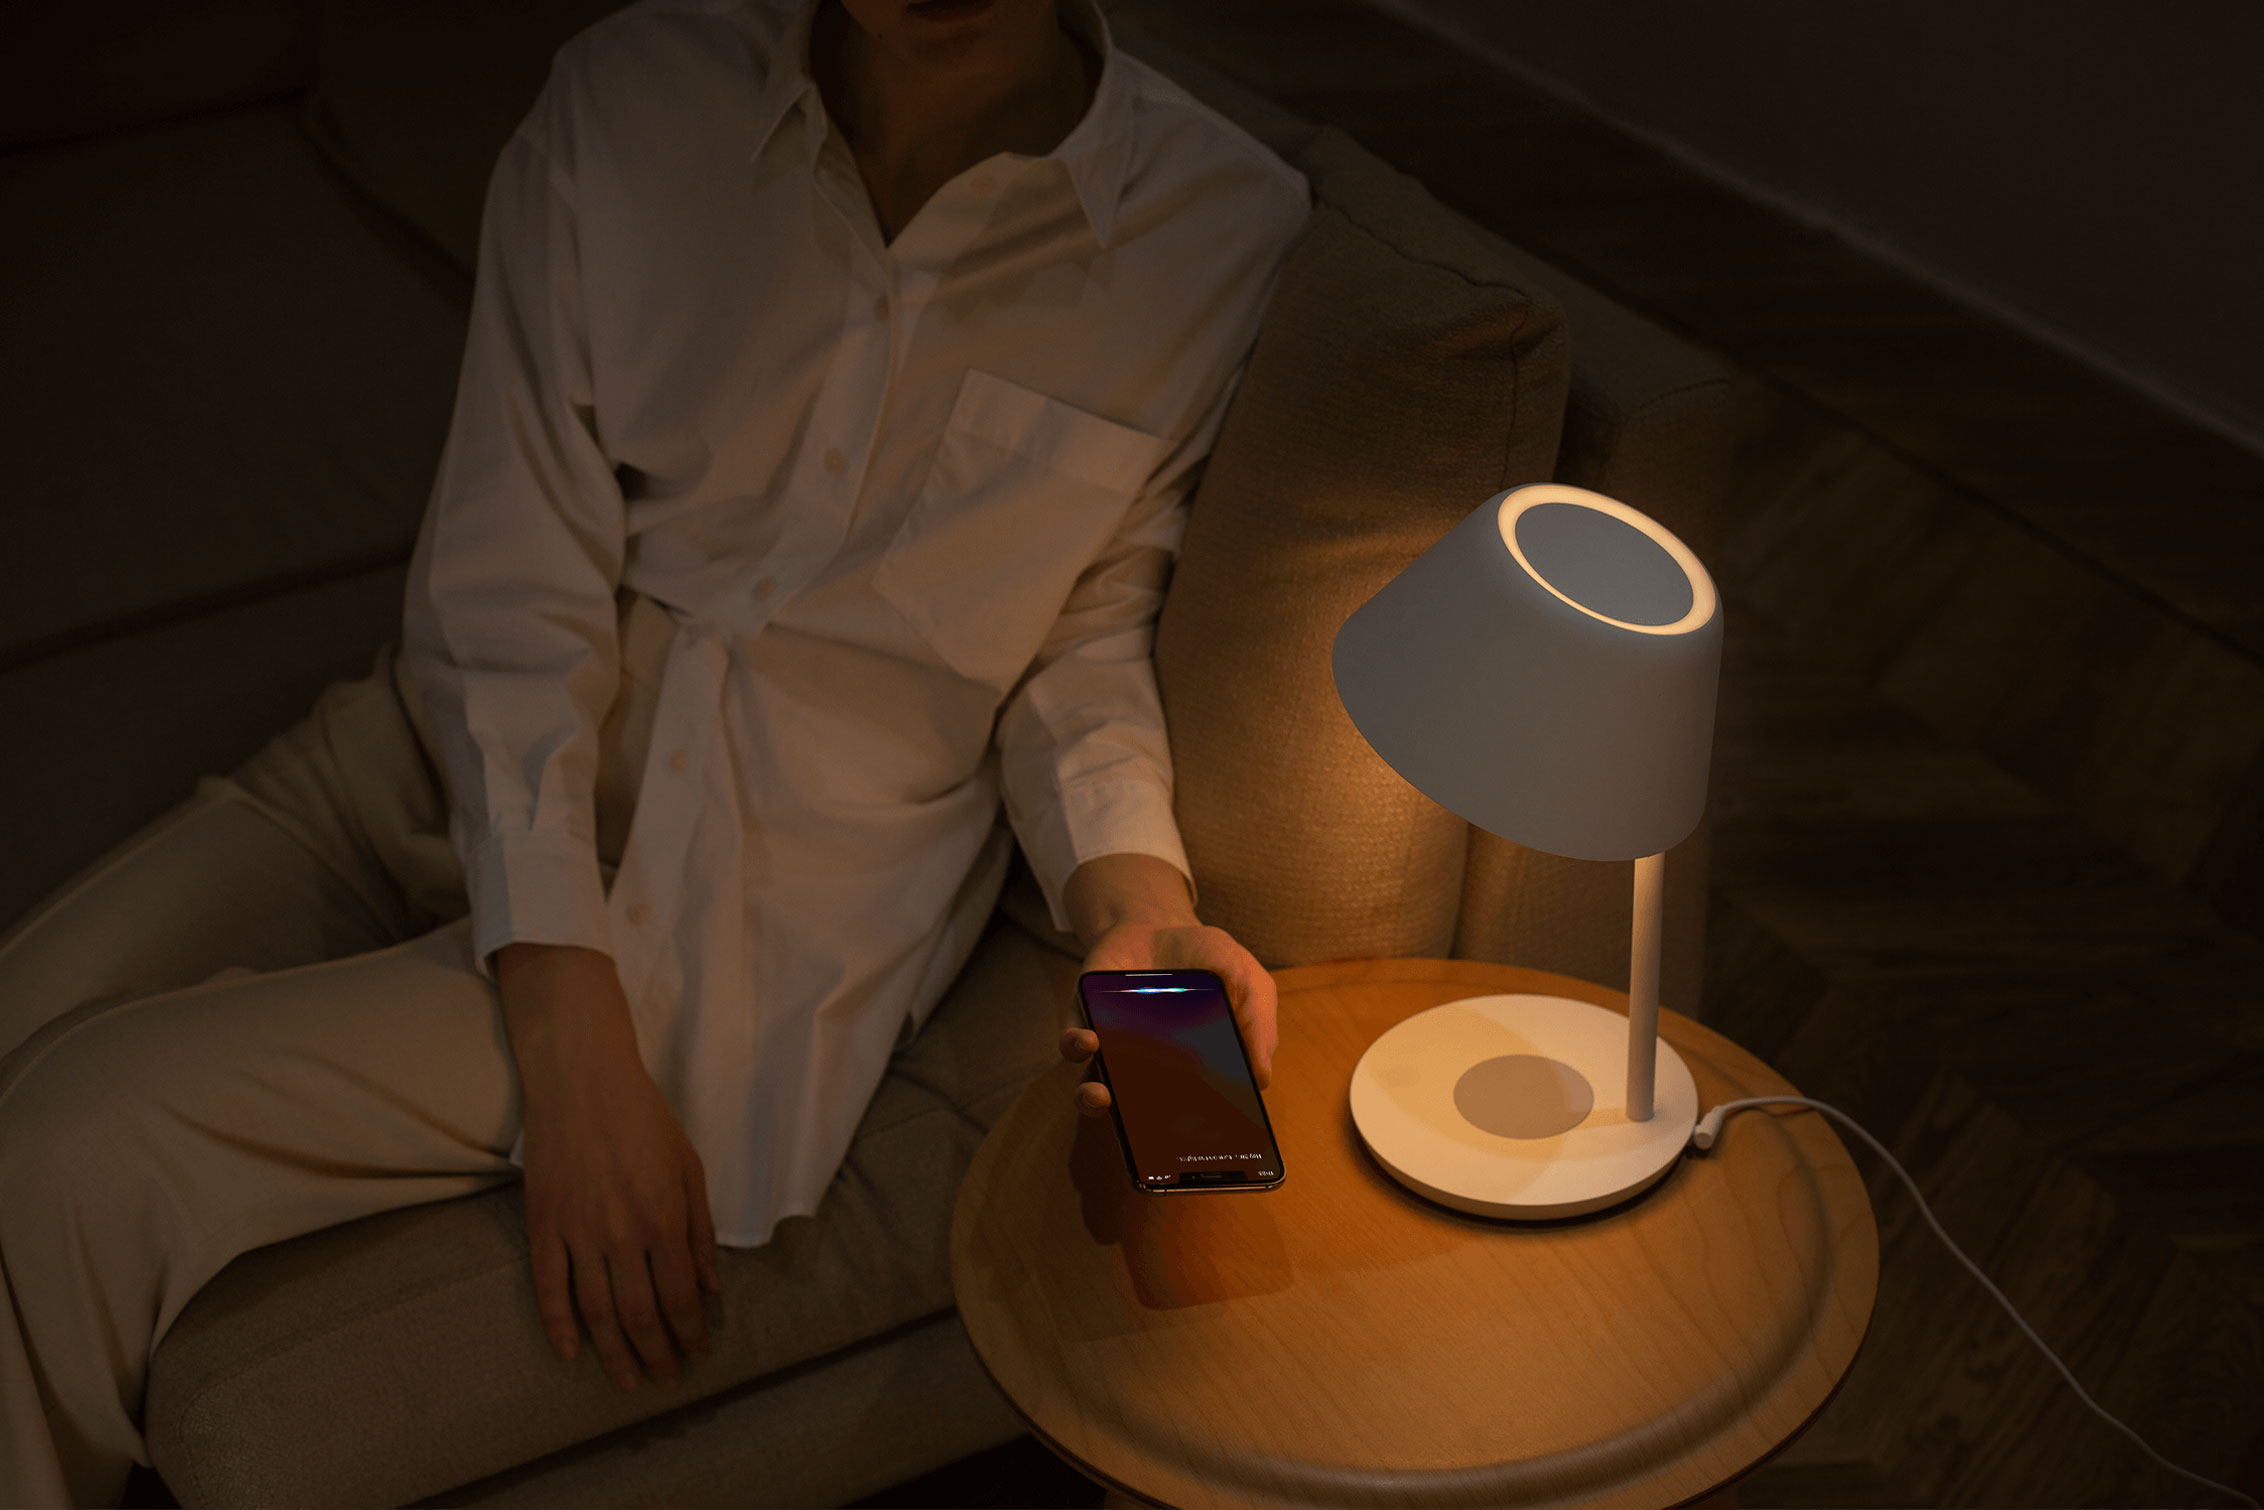 Lampe Wi-Fi YEELIGHT Staria Pro Avec Chargeur Induction